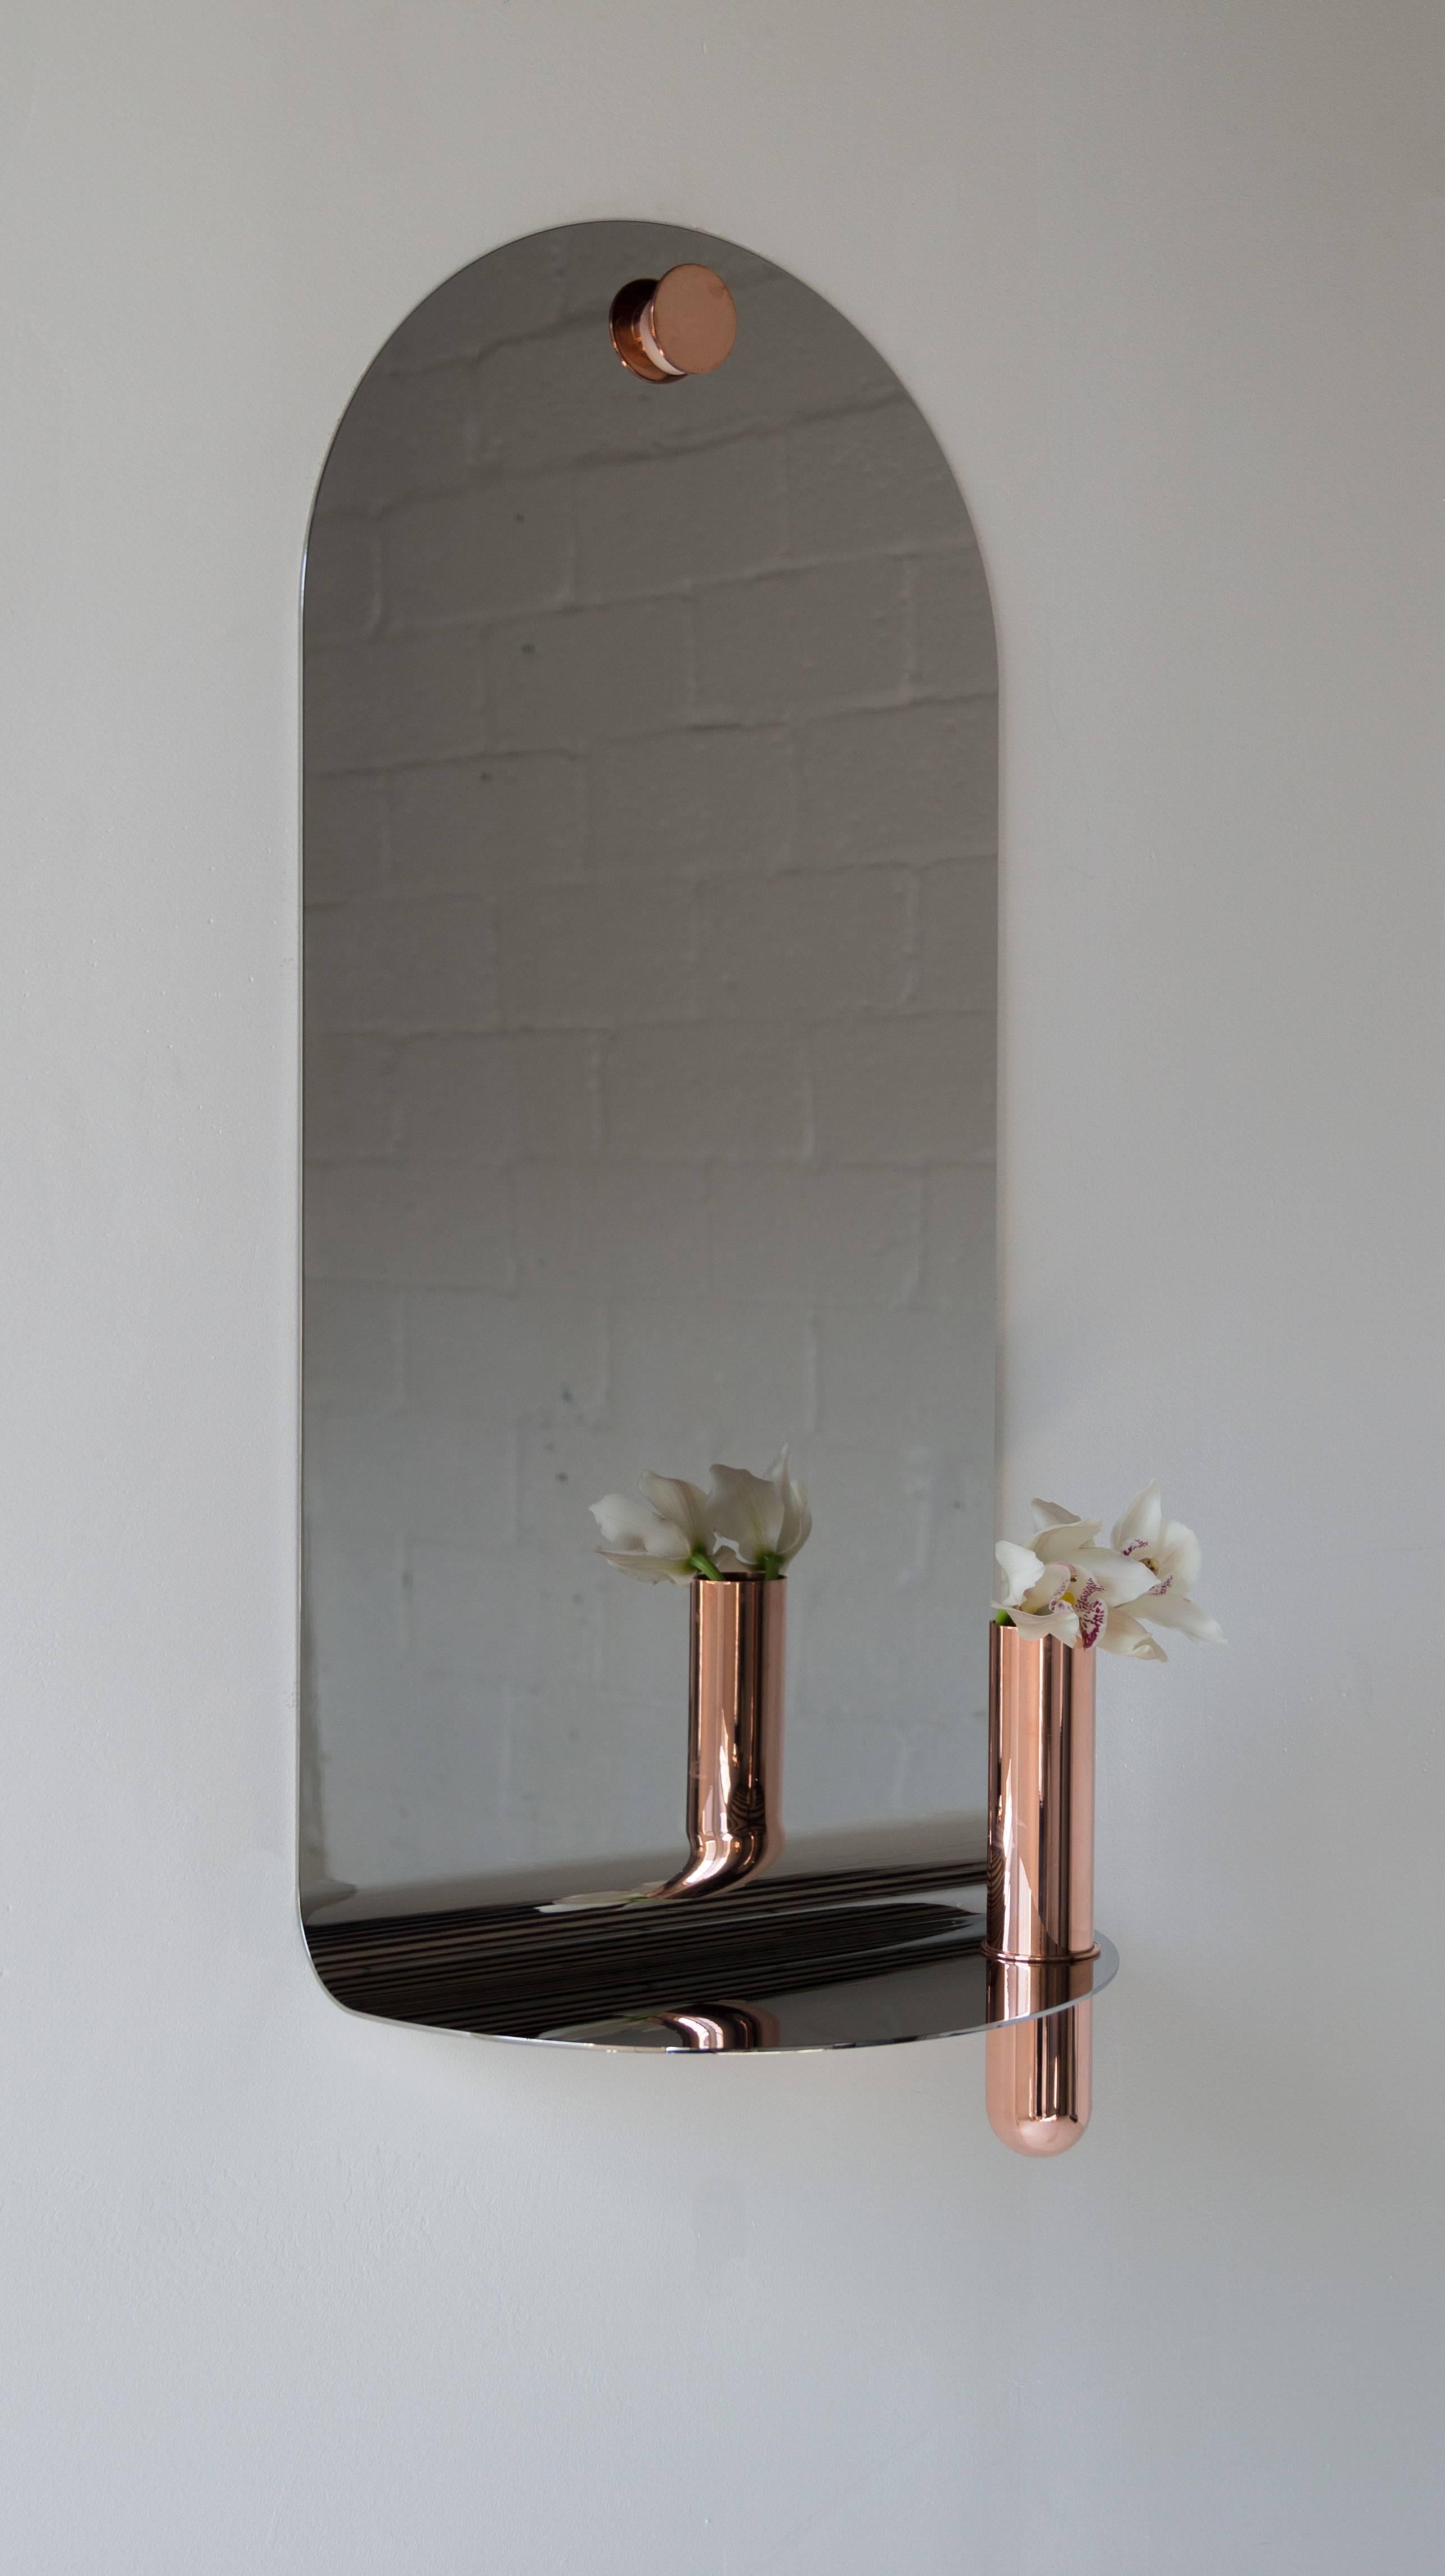 Stainless Steel Mirror with Brushed Copper Vase by Birnam Wood Studio In New Condition For Sale In Ridgewood, NY